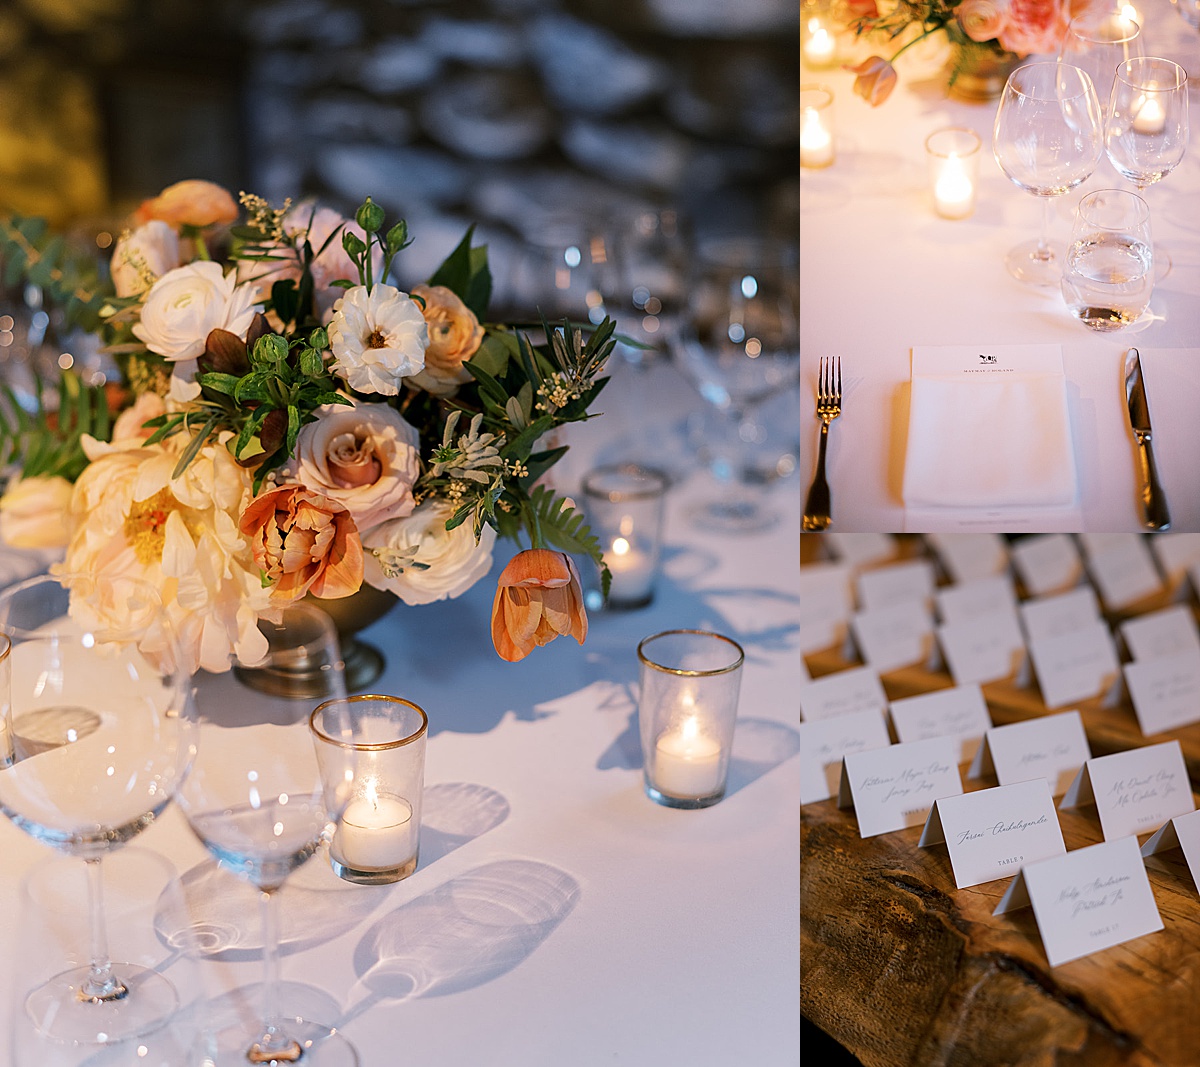 wedding reception place settings, menu, and candlelit bouquets and glassware at NY celebration shot by Sophie Kaye Photography